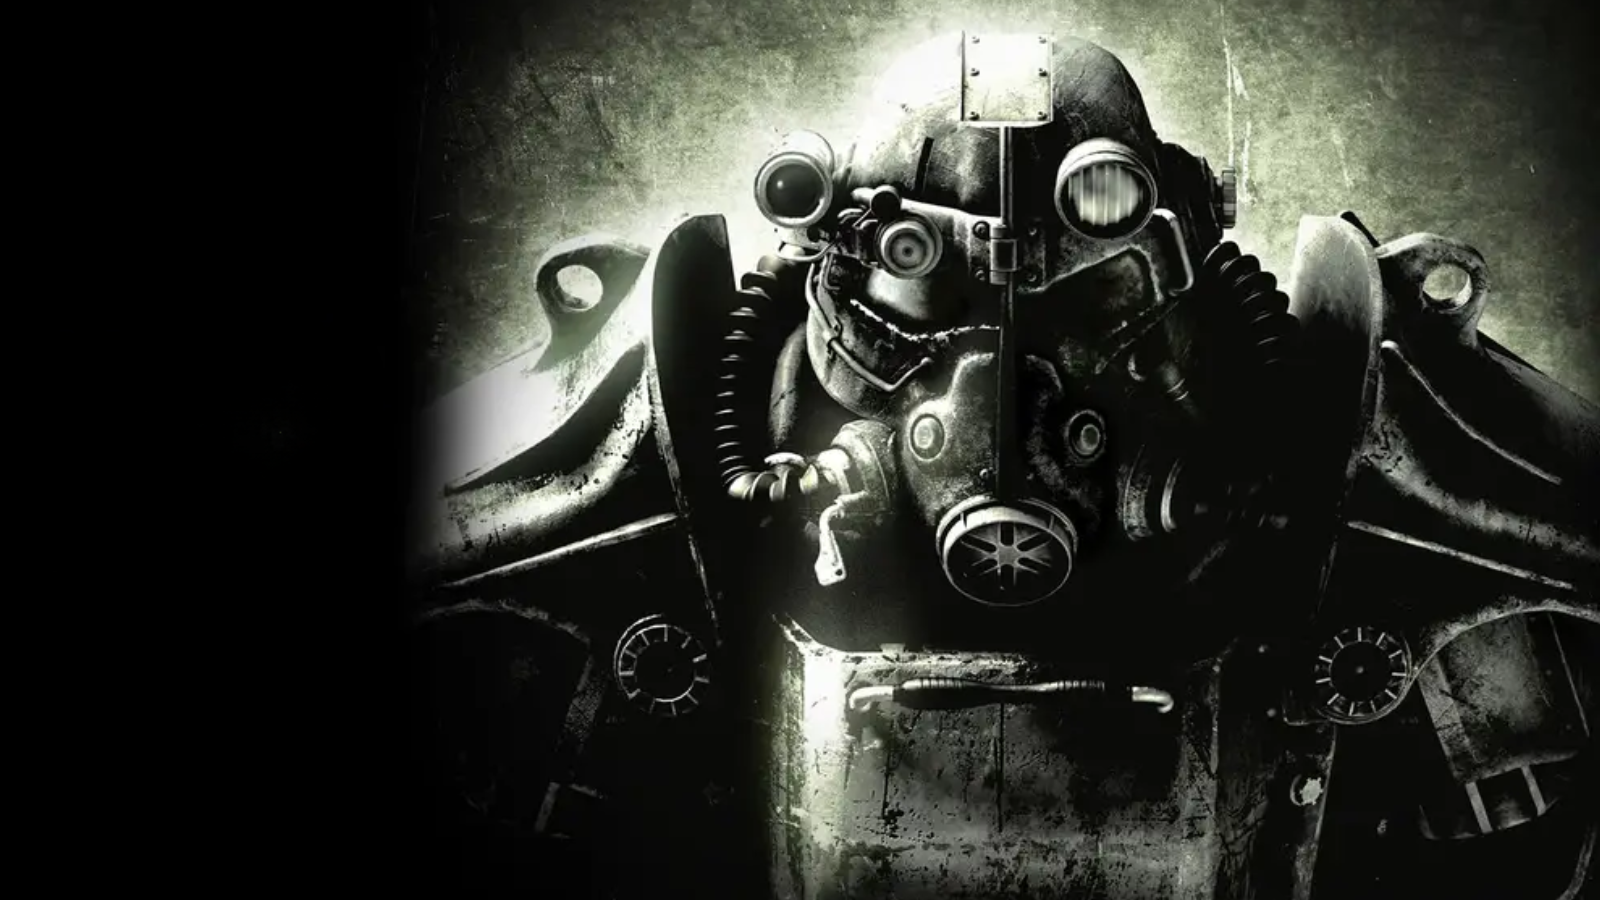 What You Need to Play Fallout 3 GOTY Edition